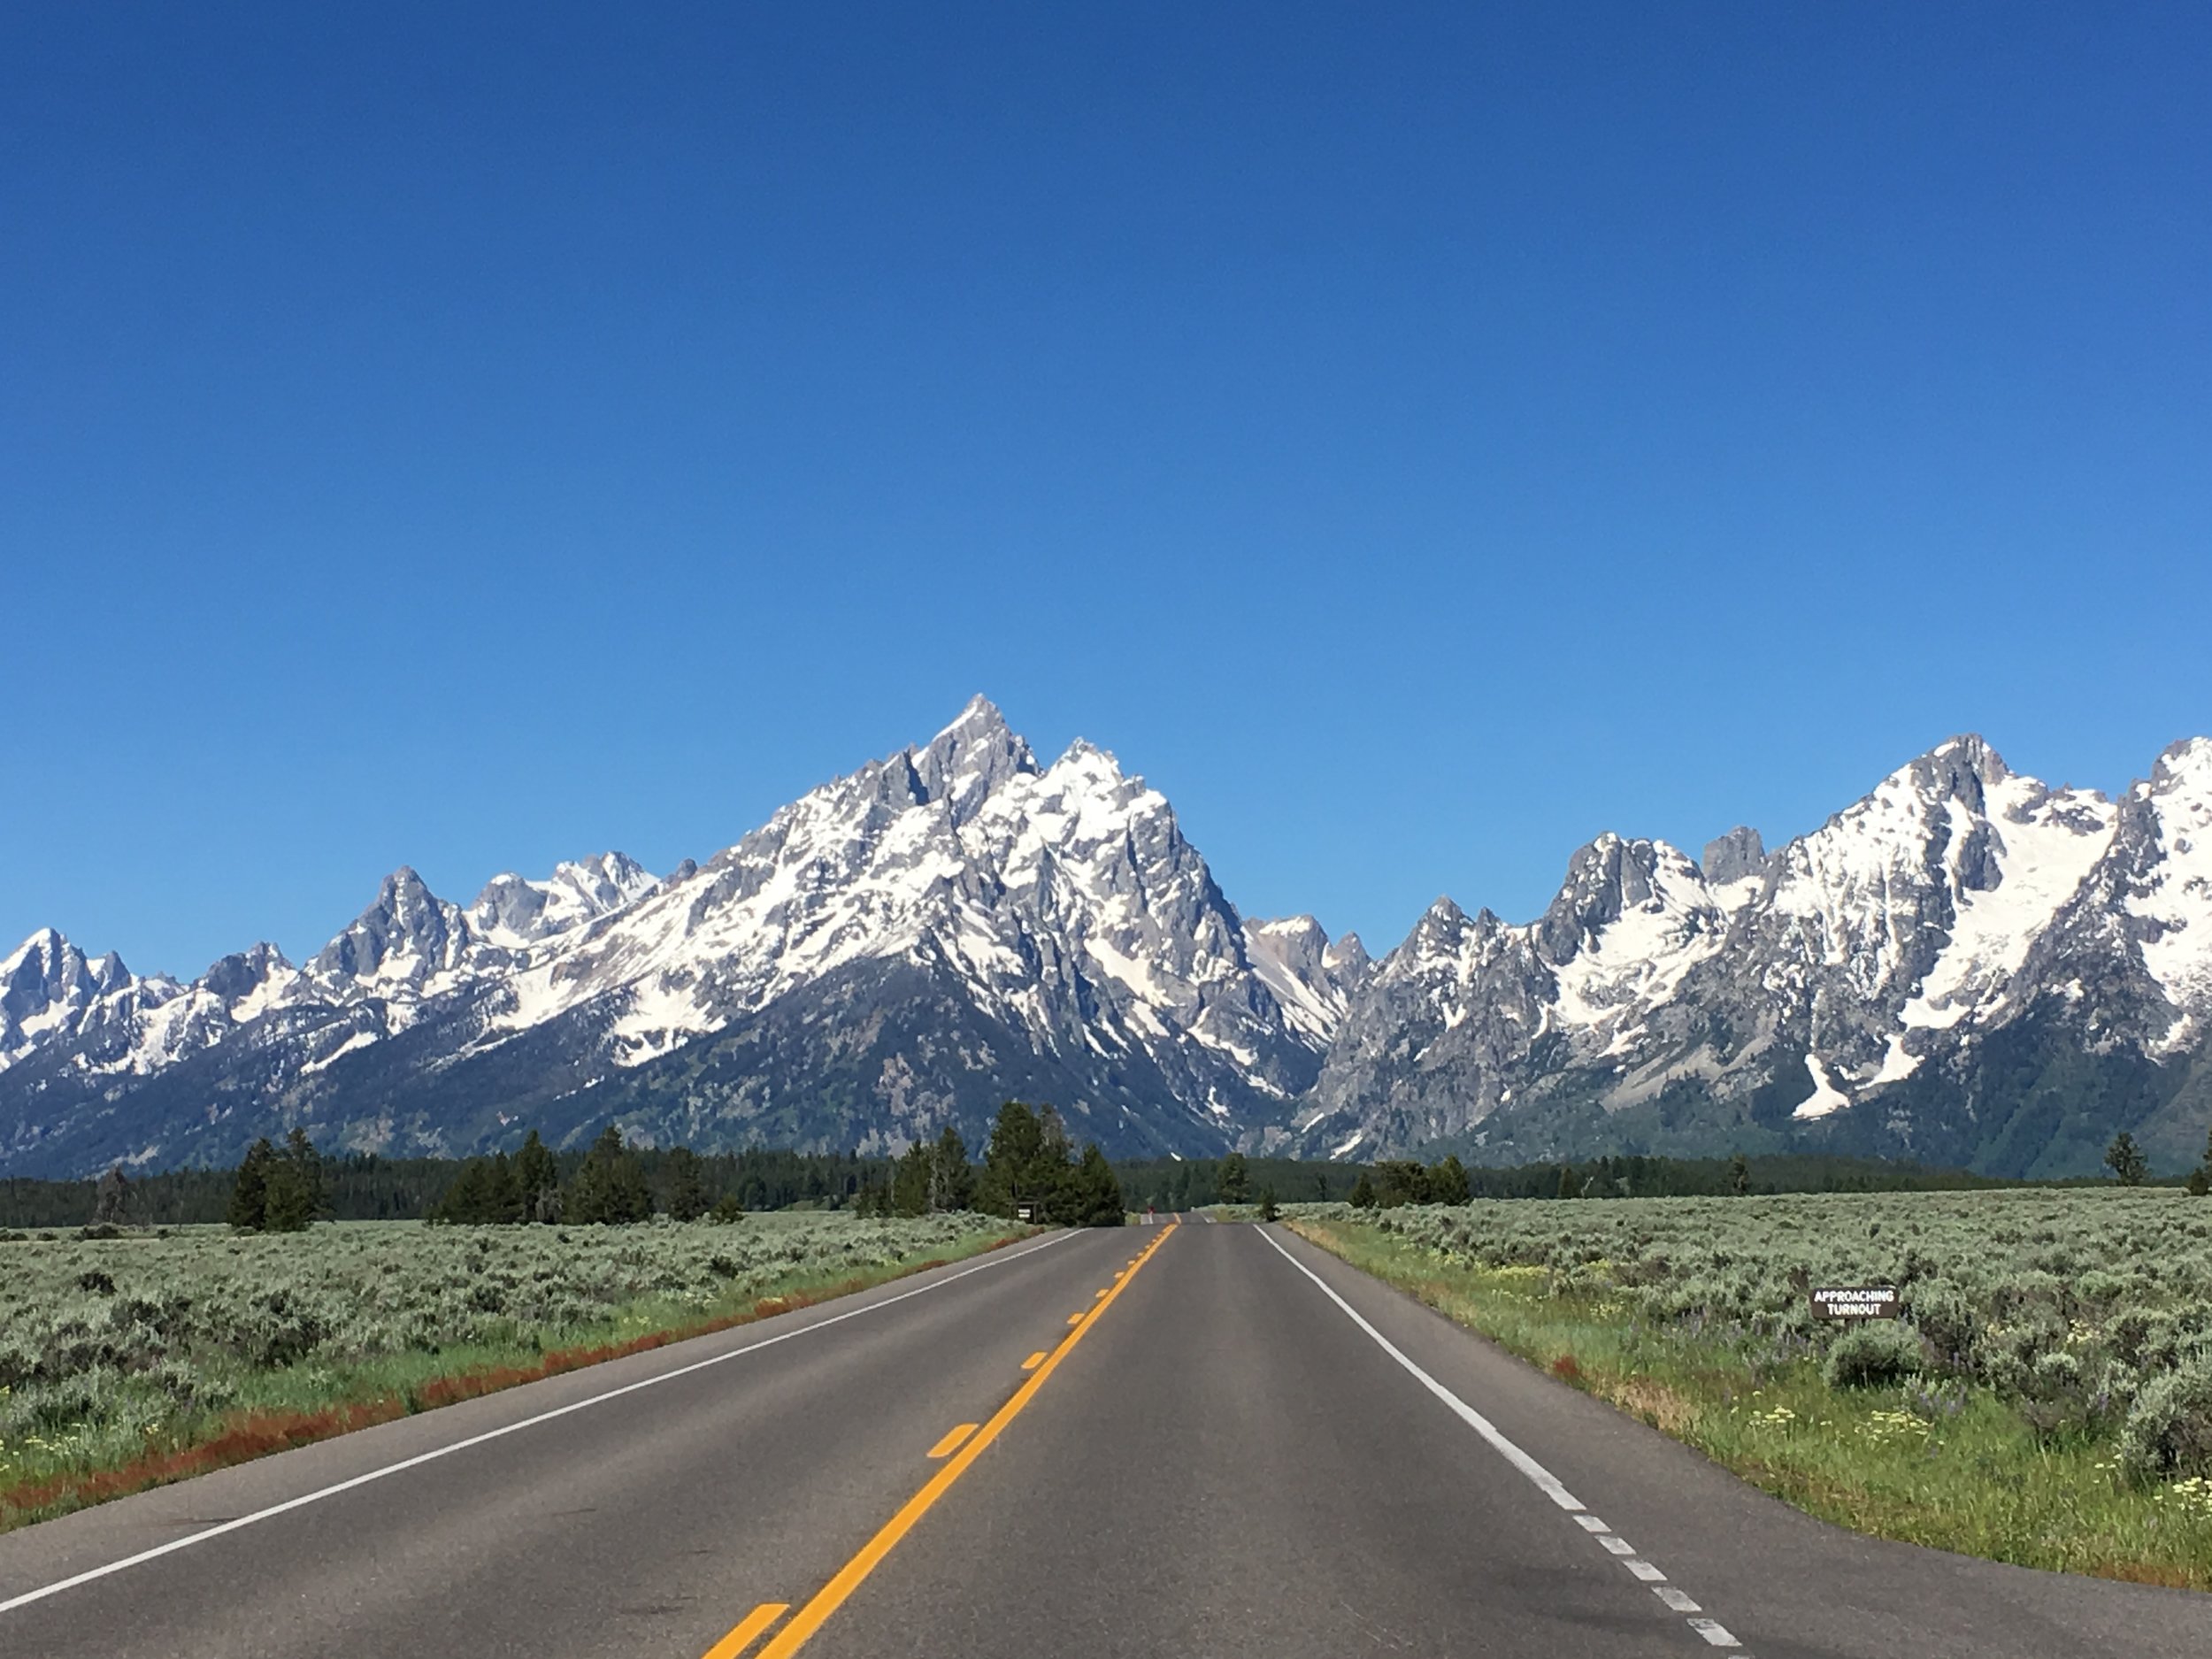 The road to the Grand Teton National Park